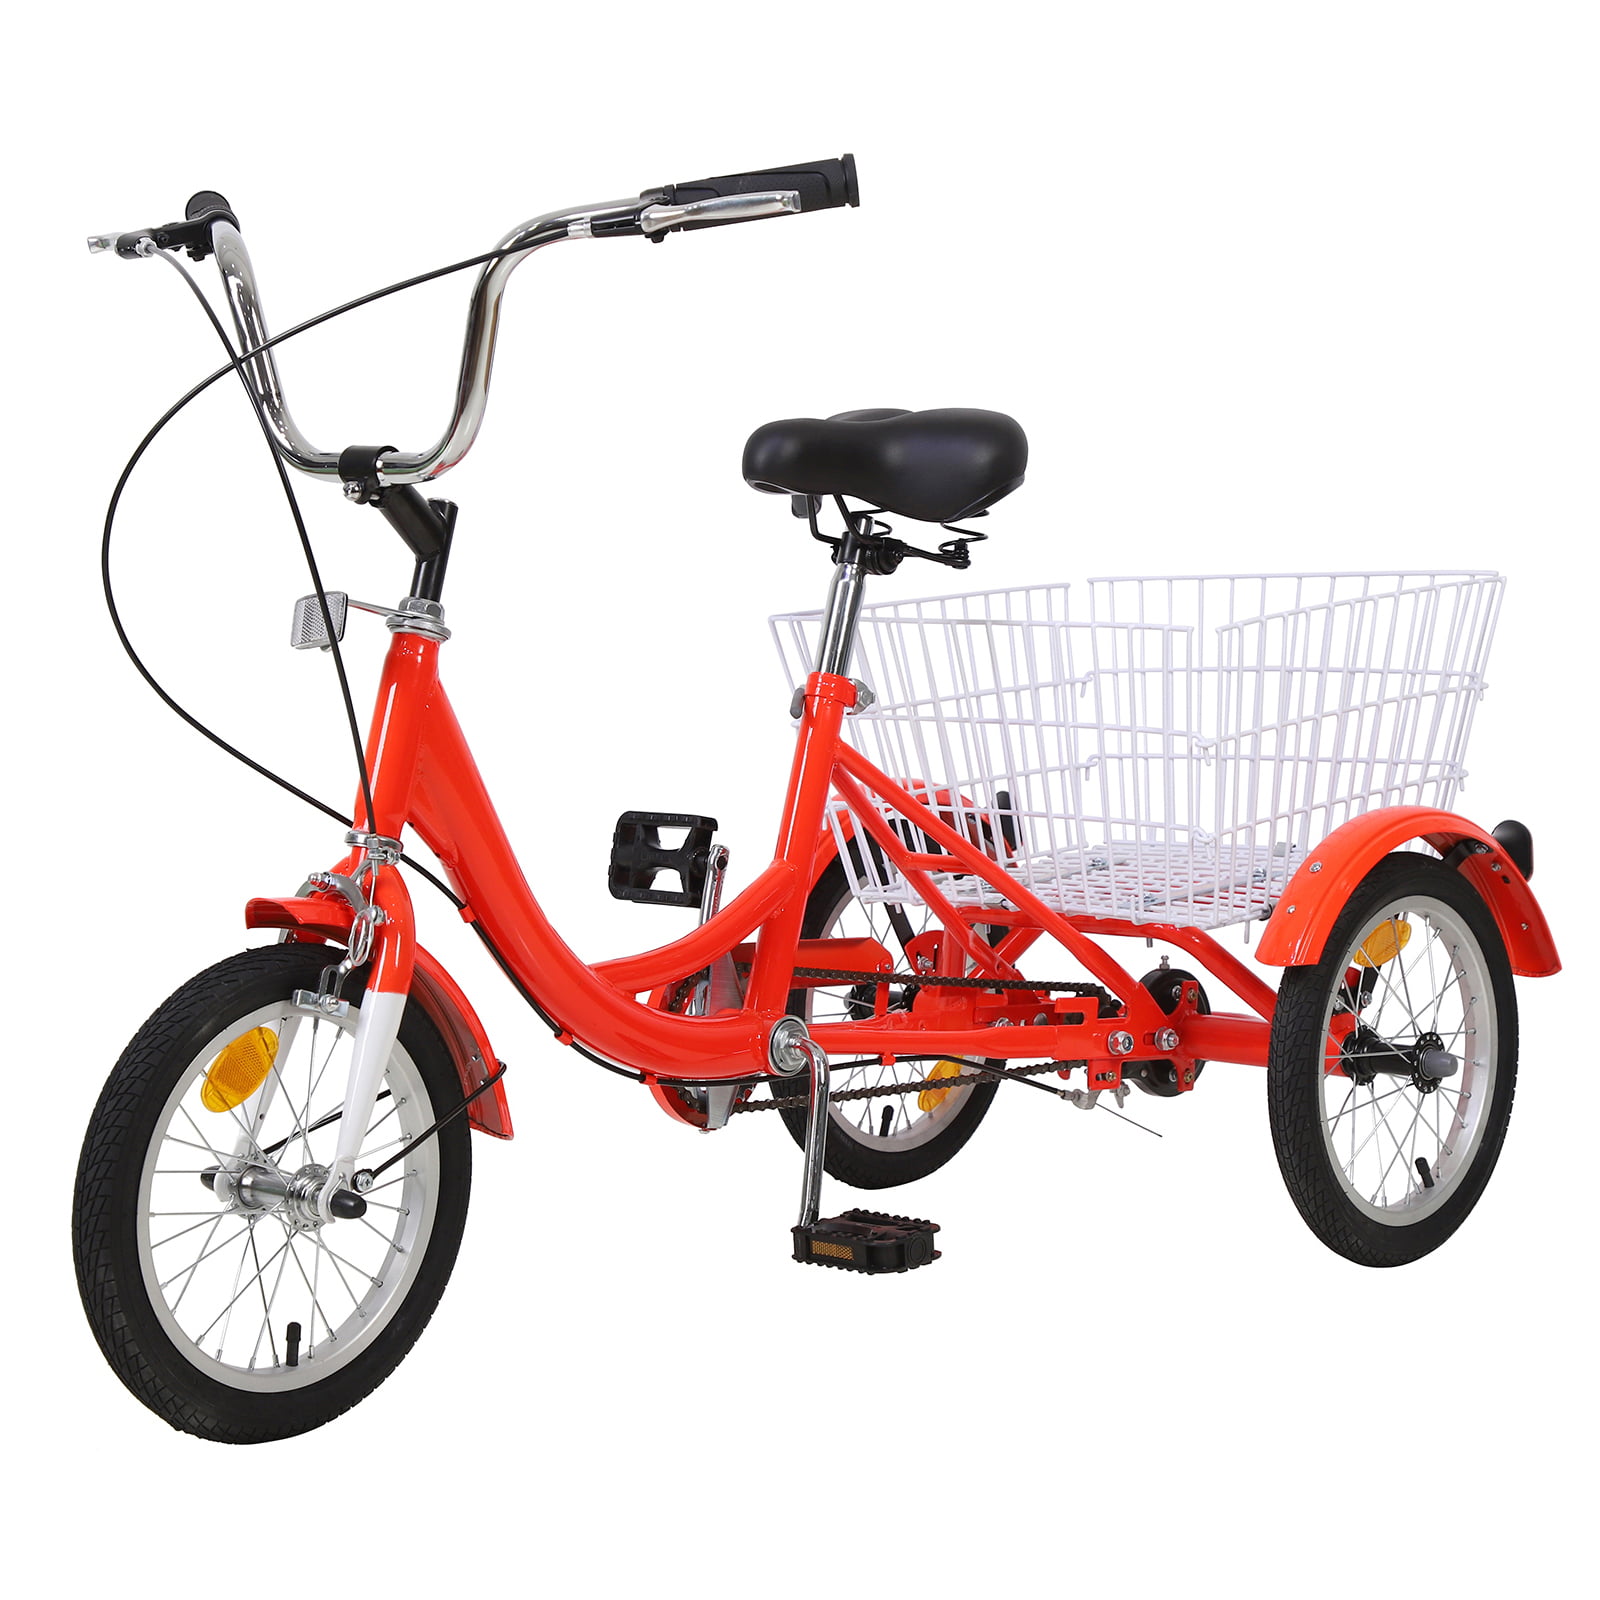 14 inch Kids Childrens Tricycle 3 Wheel Bike Bicycle with Basket for 6-12 Years 